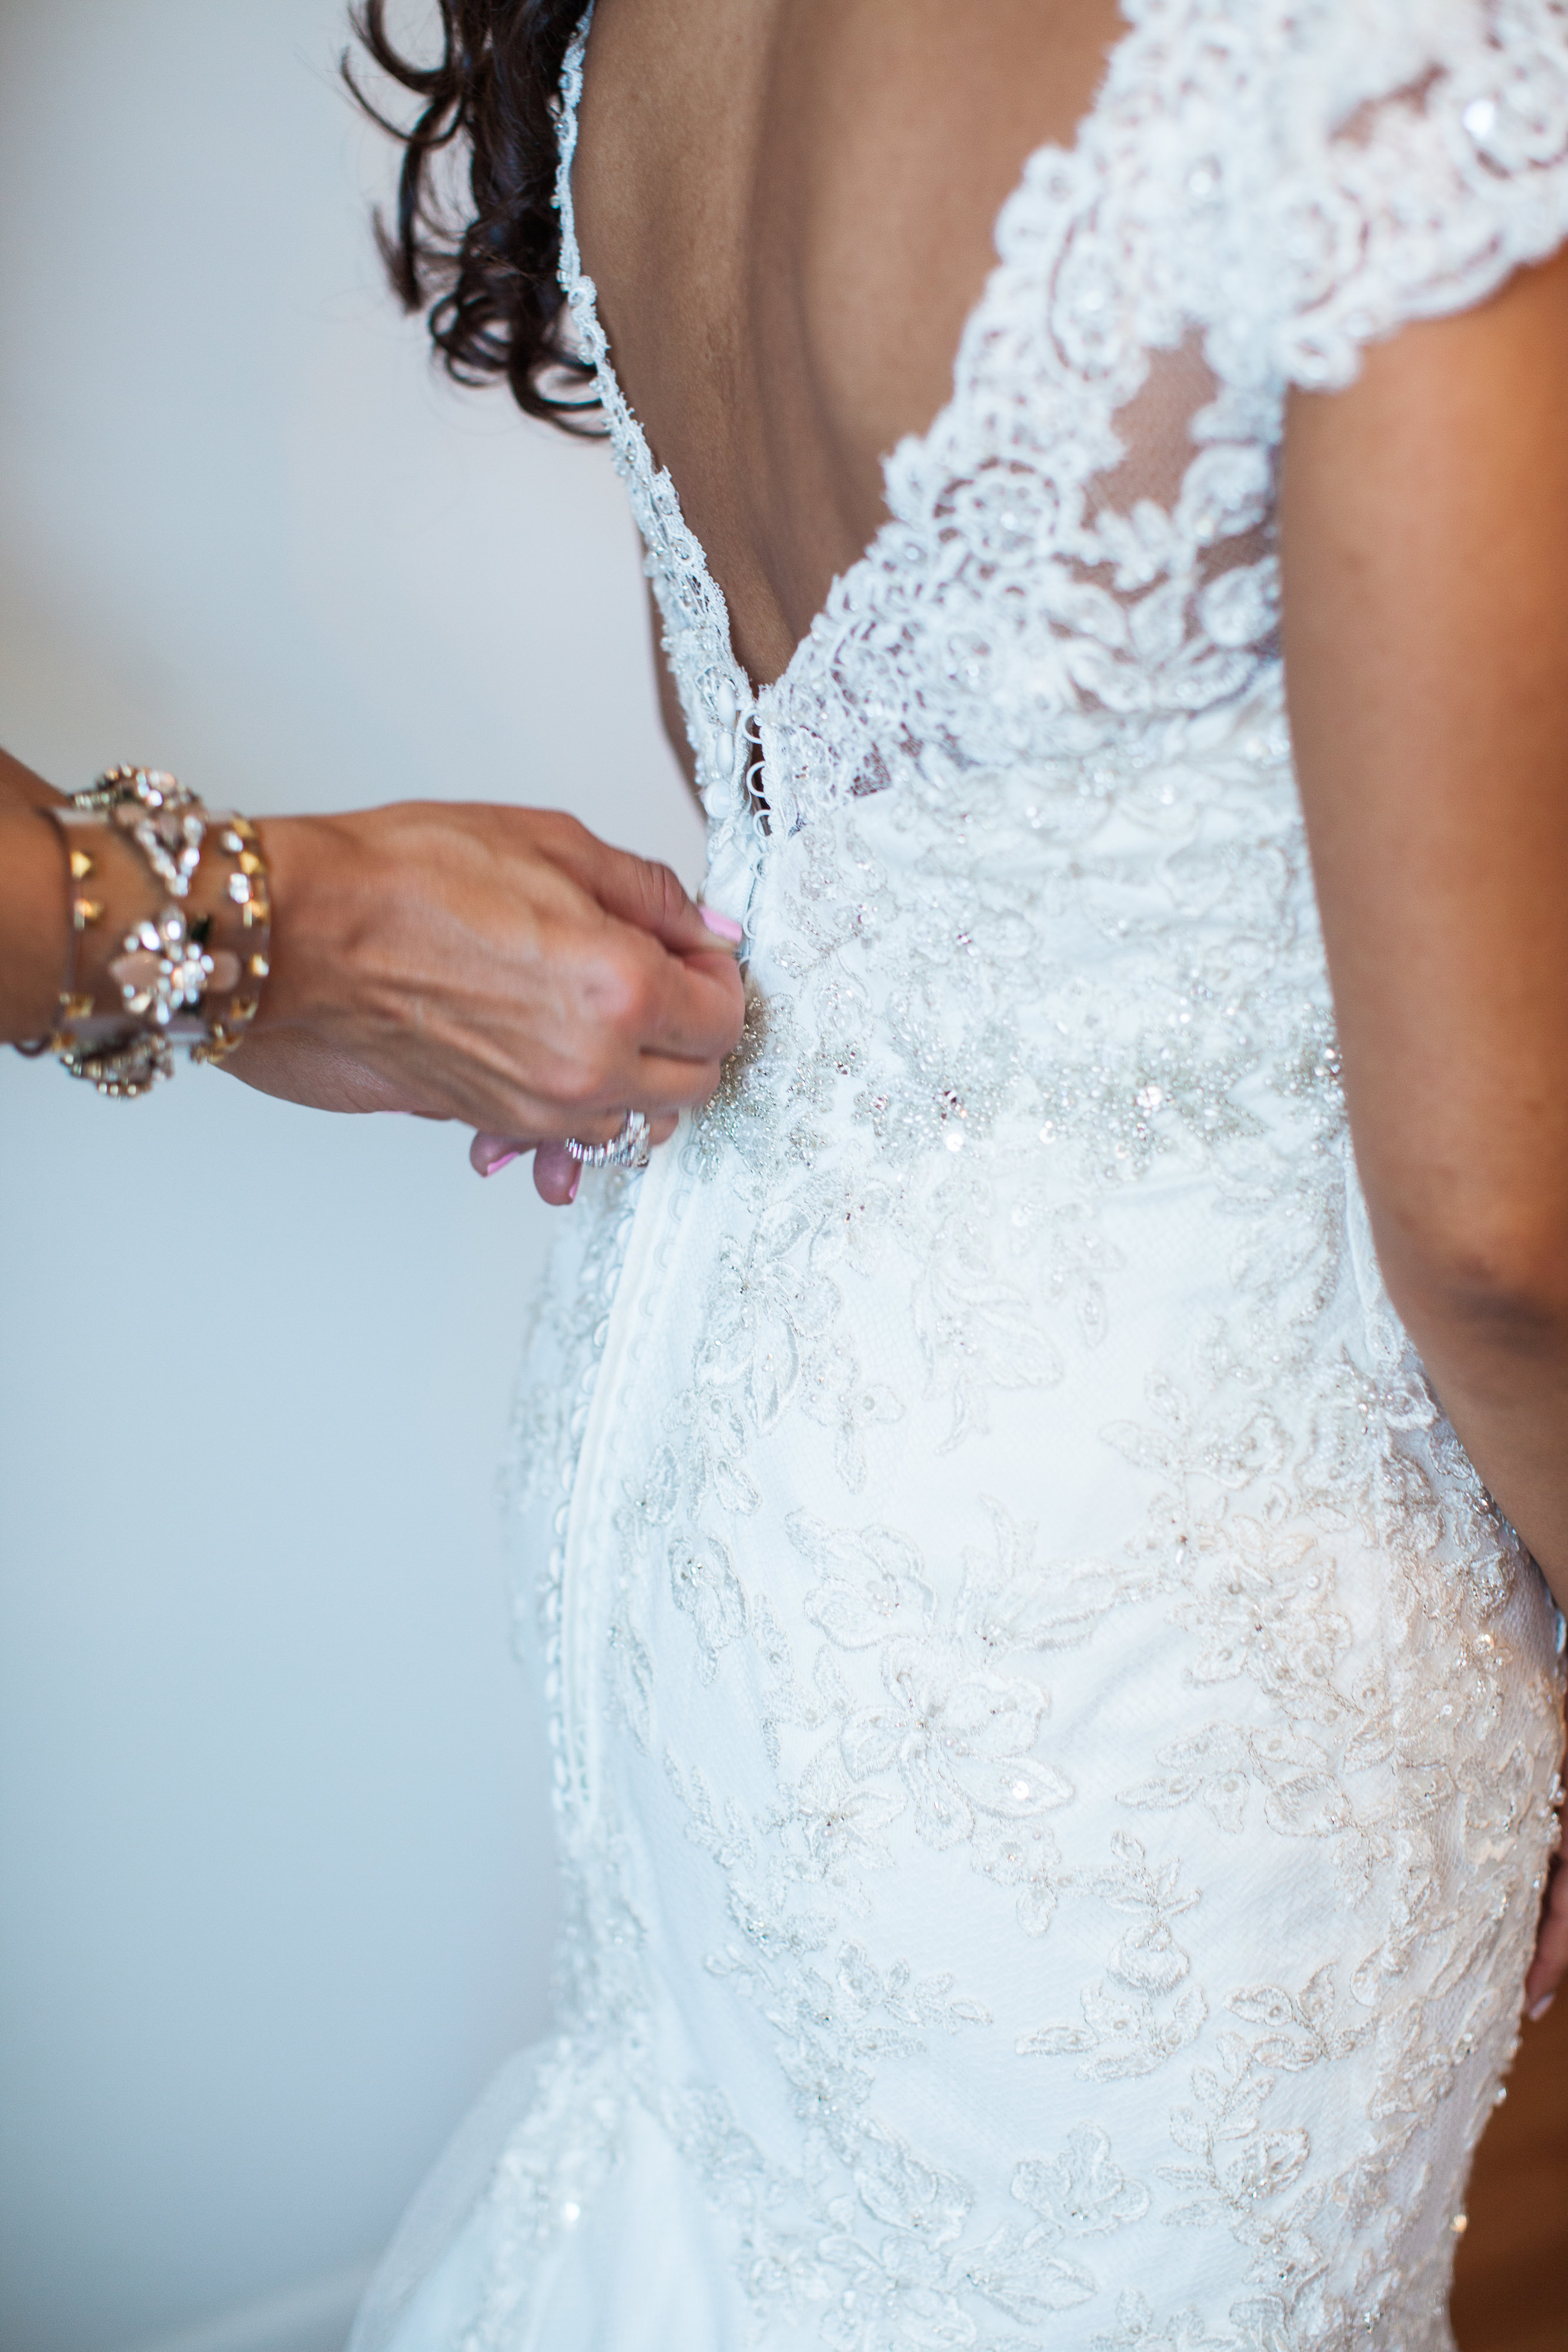 View More: http://jessicamicciophotography.pass.us/ludmilla-paul-wedding